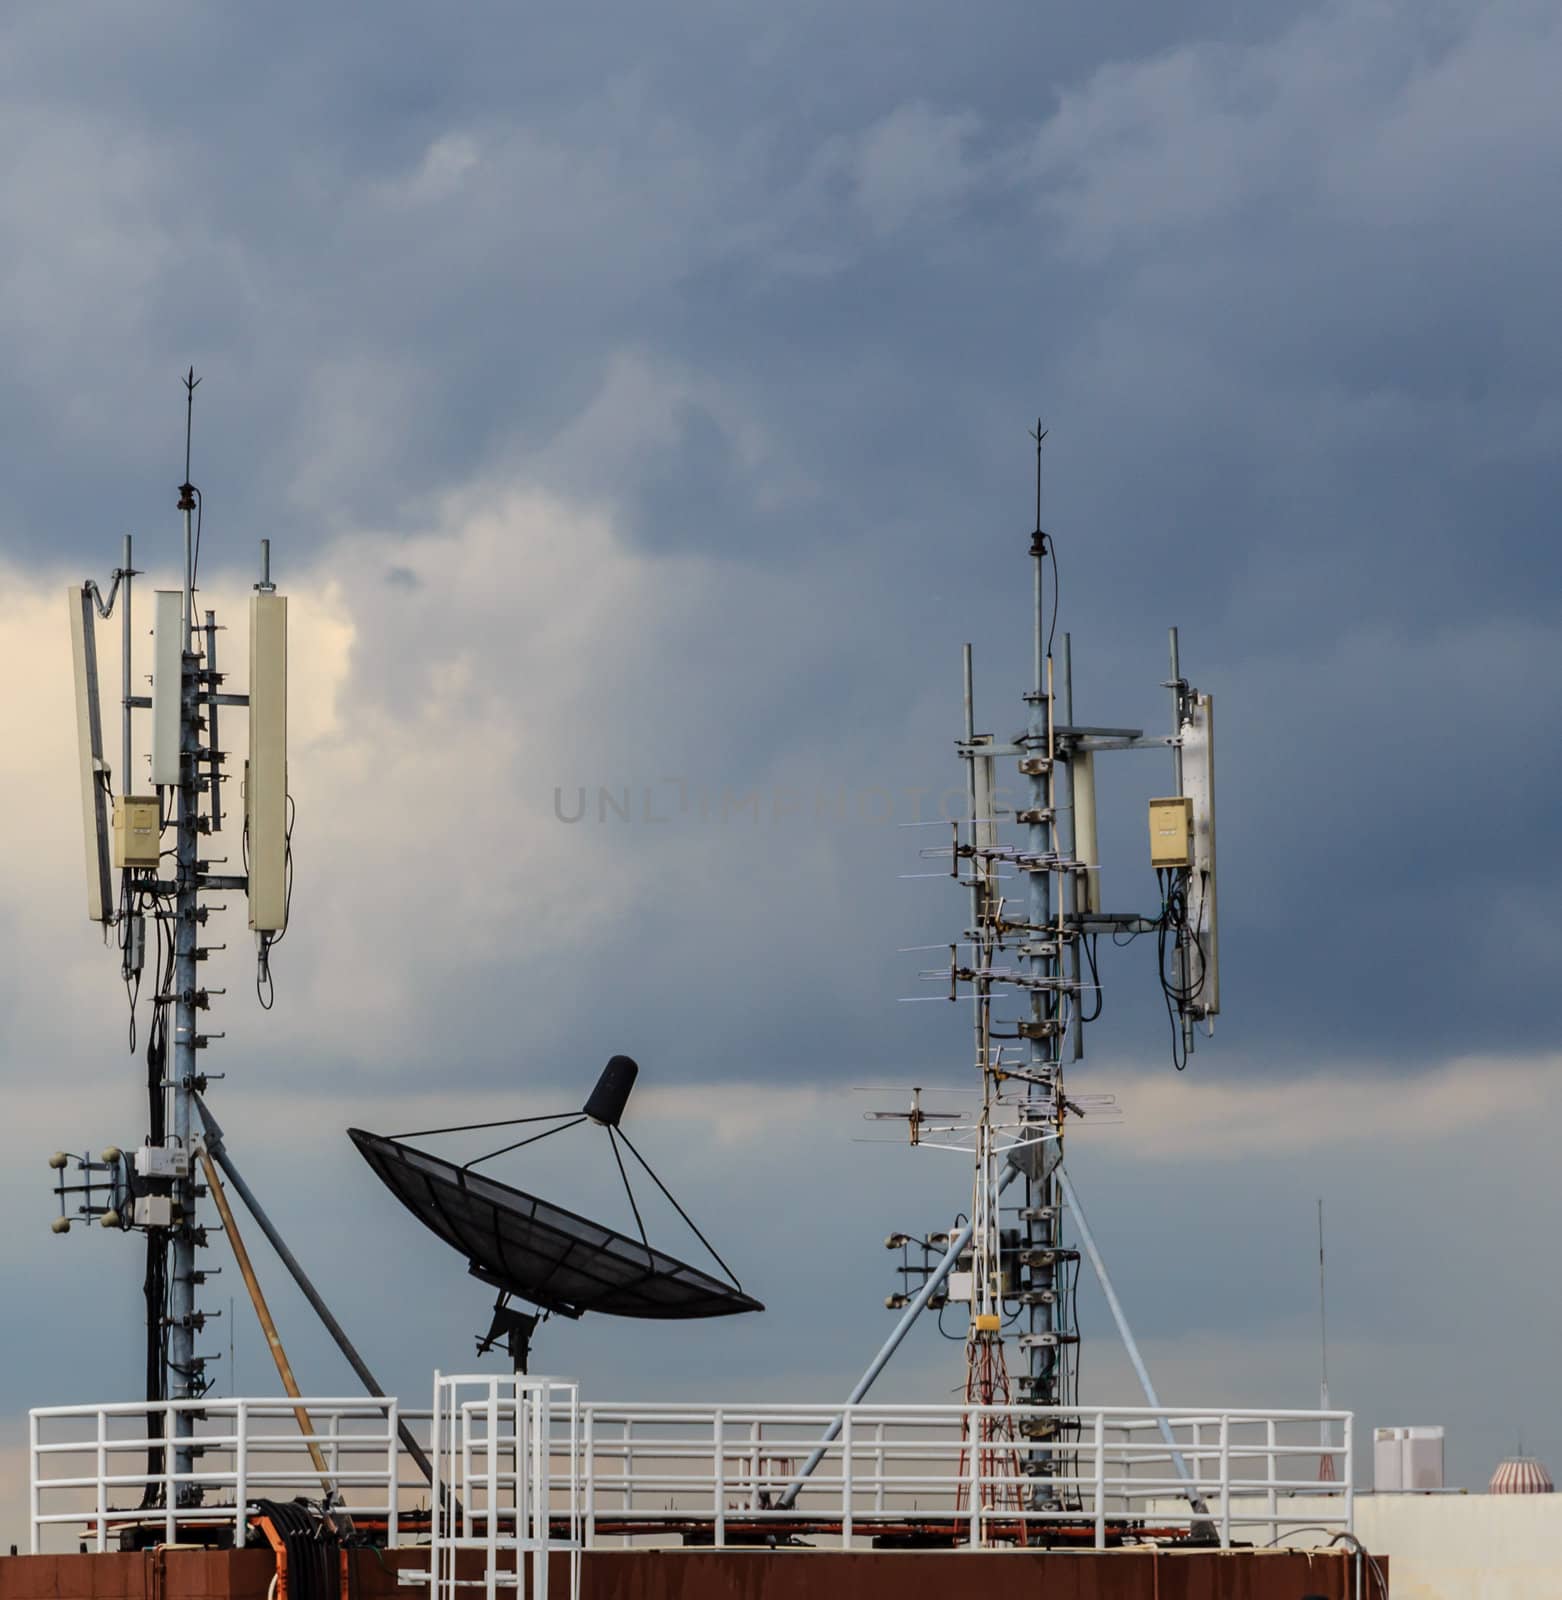 Satellite dish and mobile phone communication repeater antenna in cloudy sky